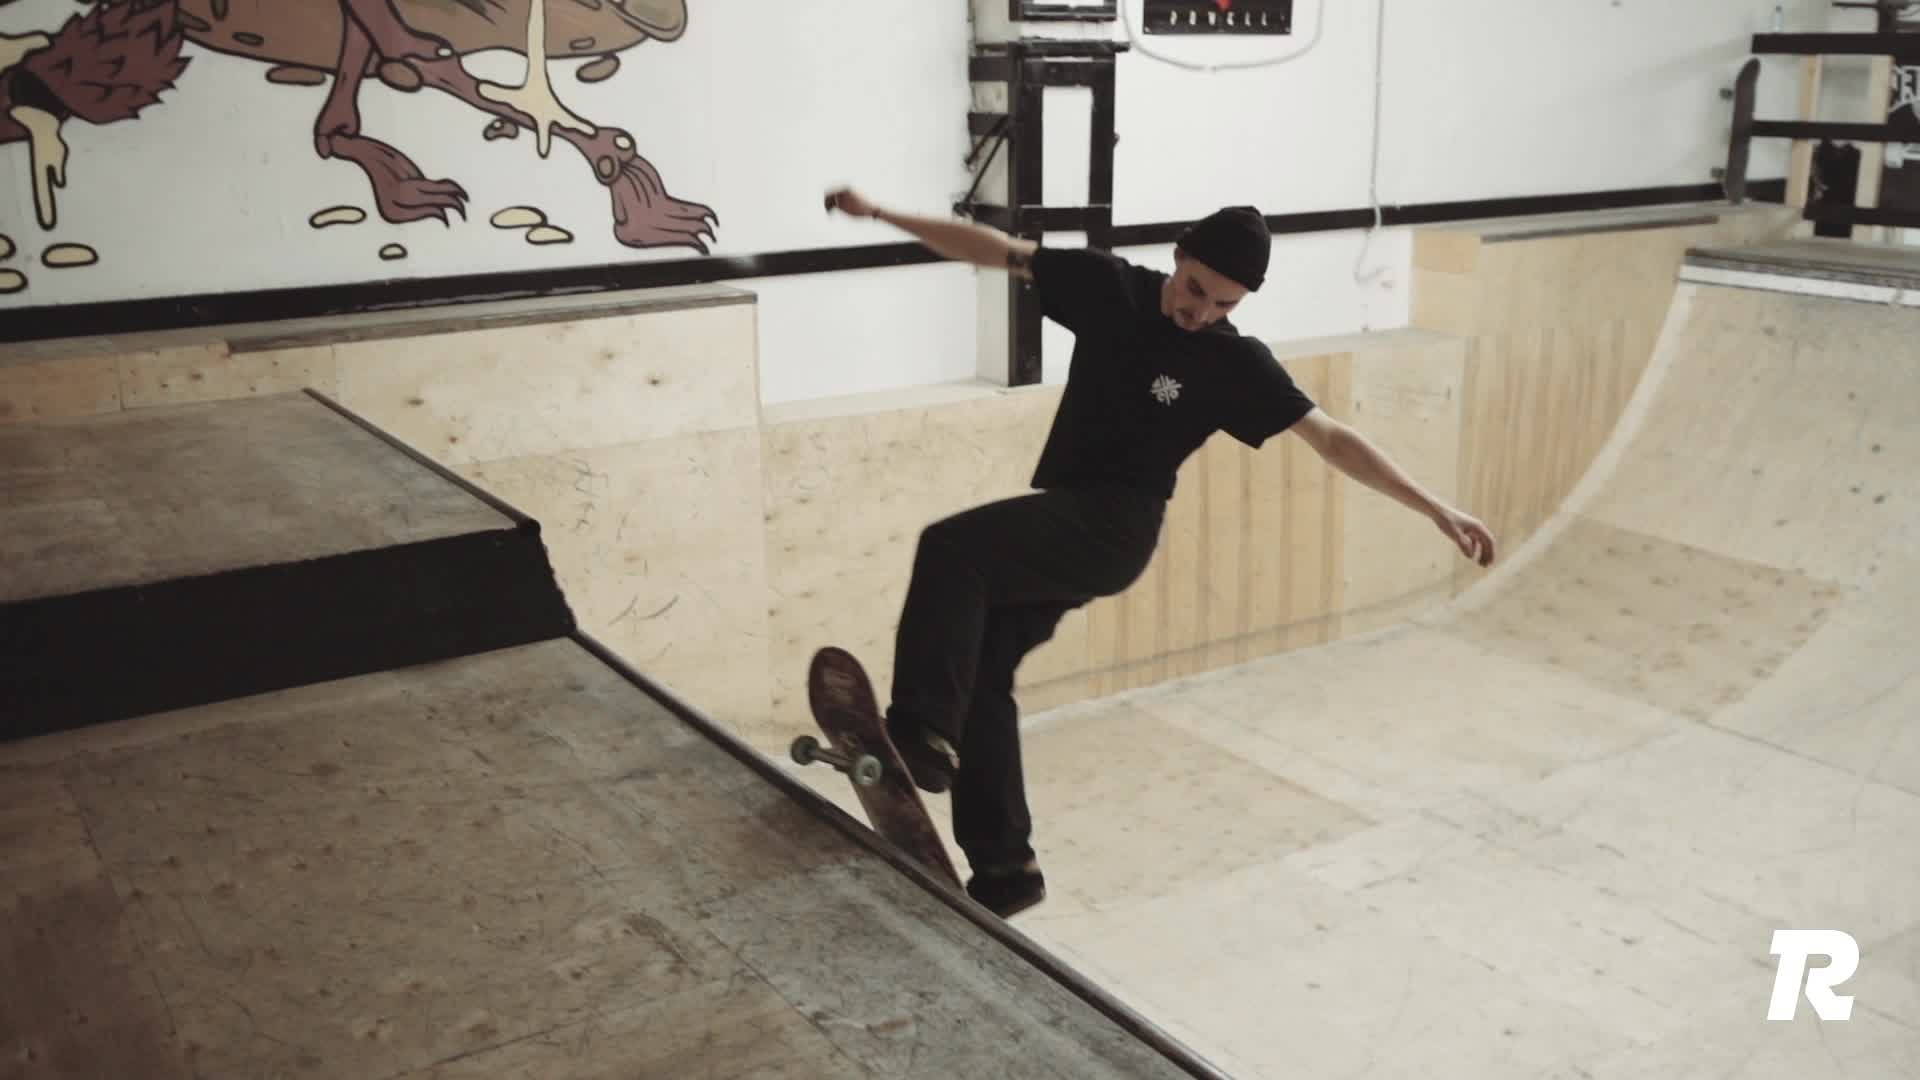 The top 35 Ramp on a Skateboard